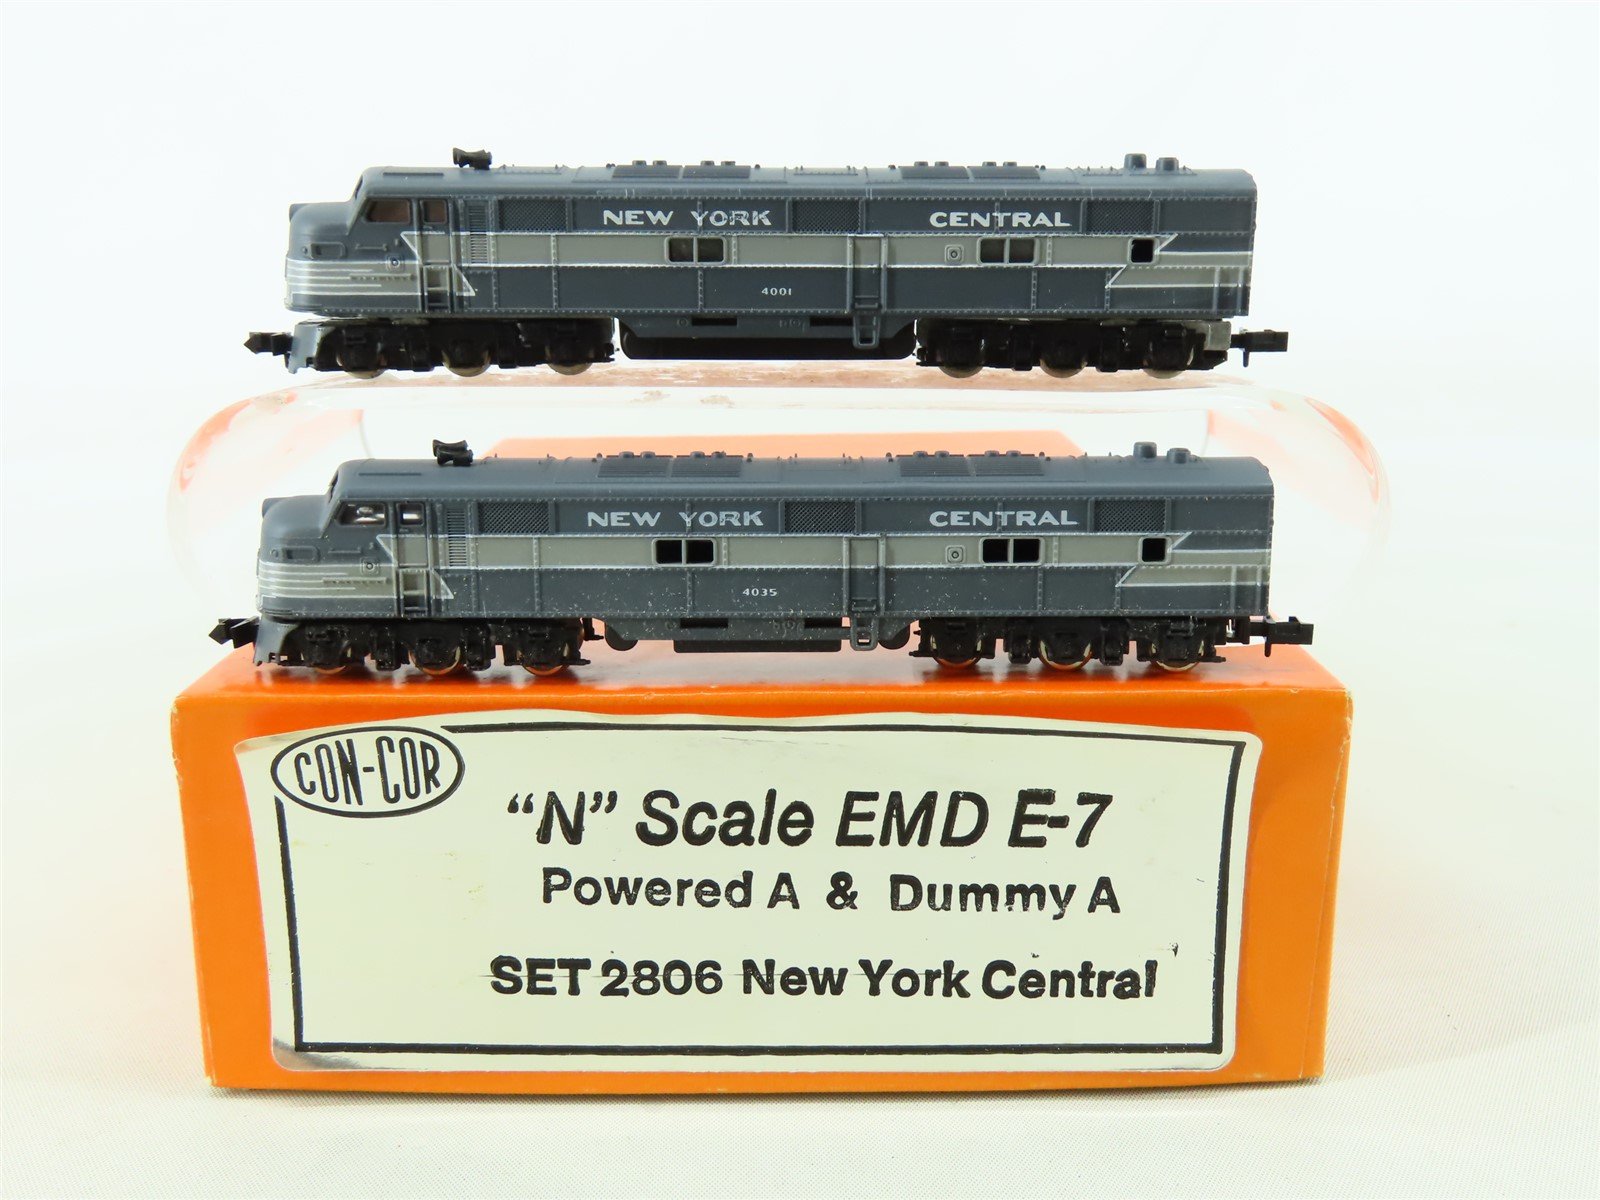 N Scale Con-Cor 2806 NYC New York Central EMD E7A/A Diesel Set #4001/4035